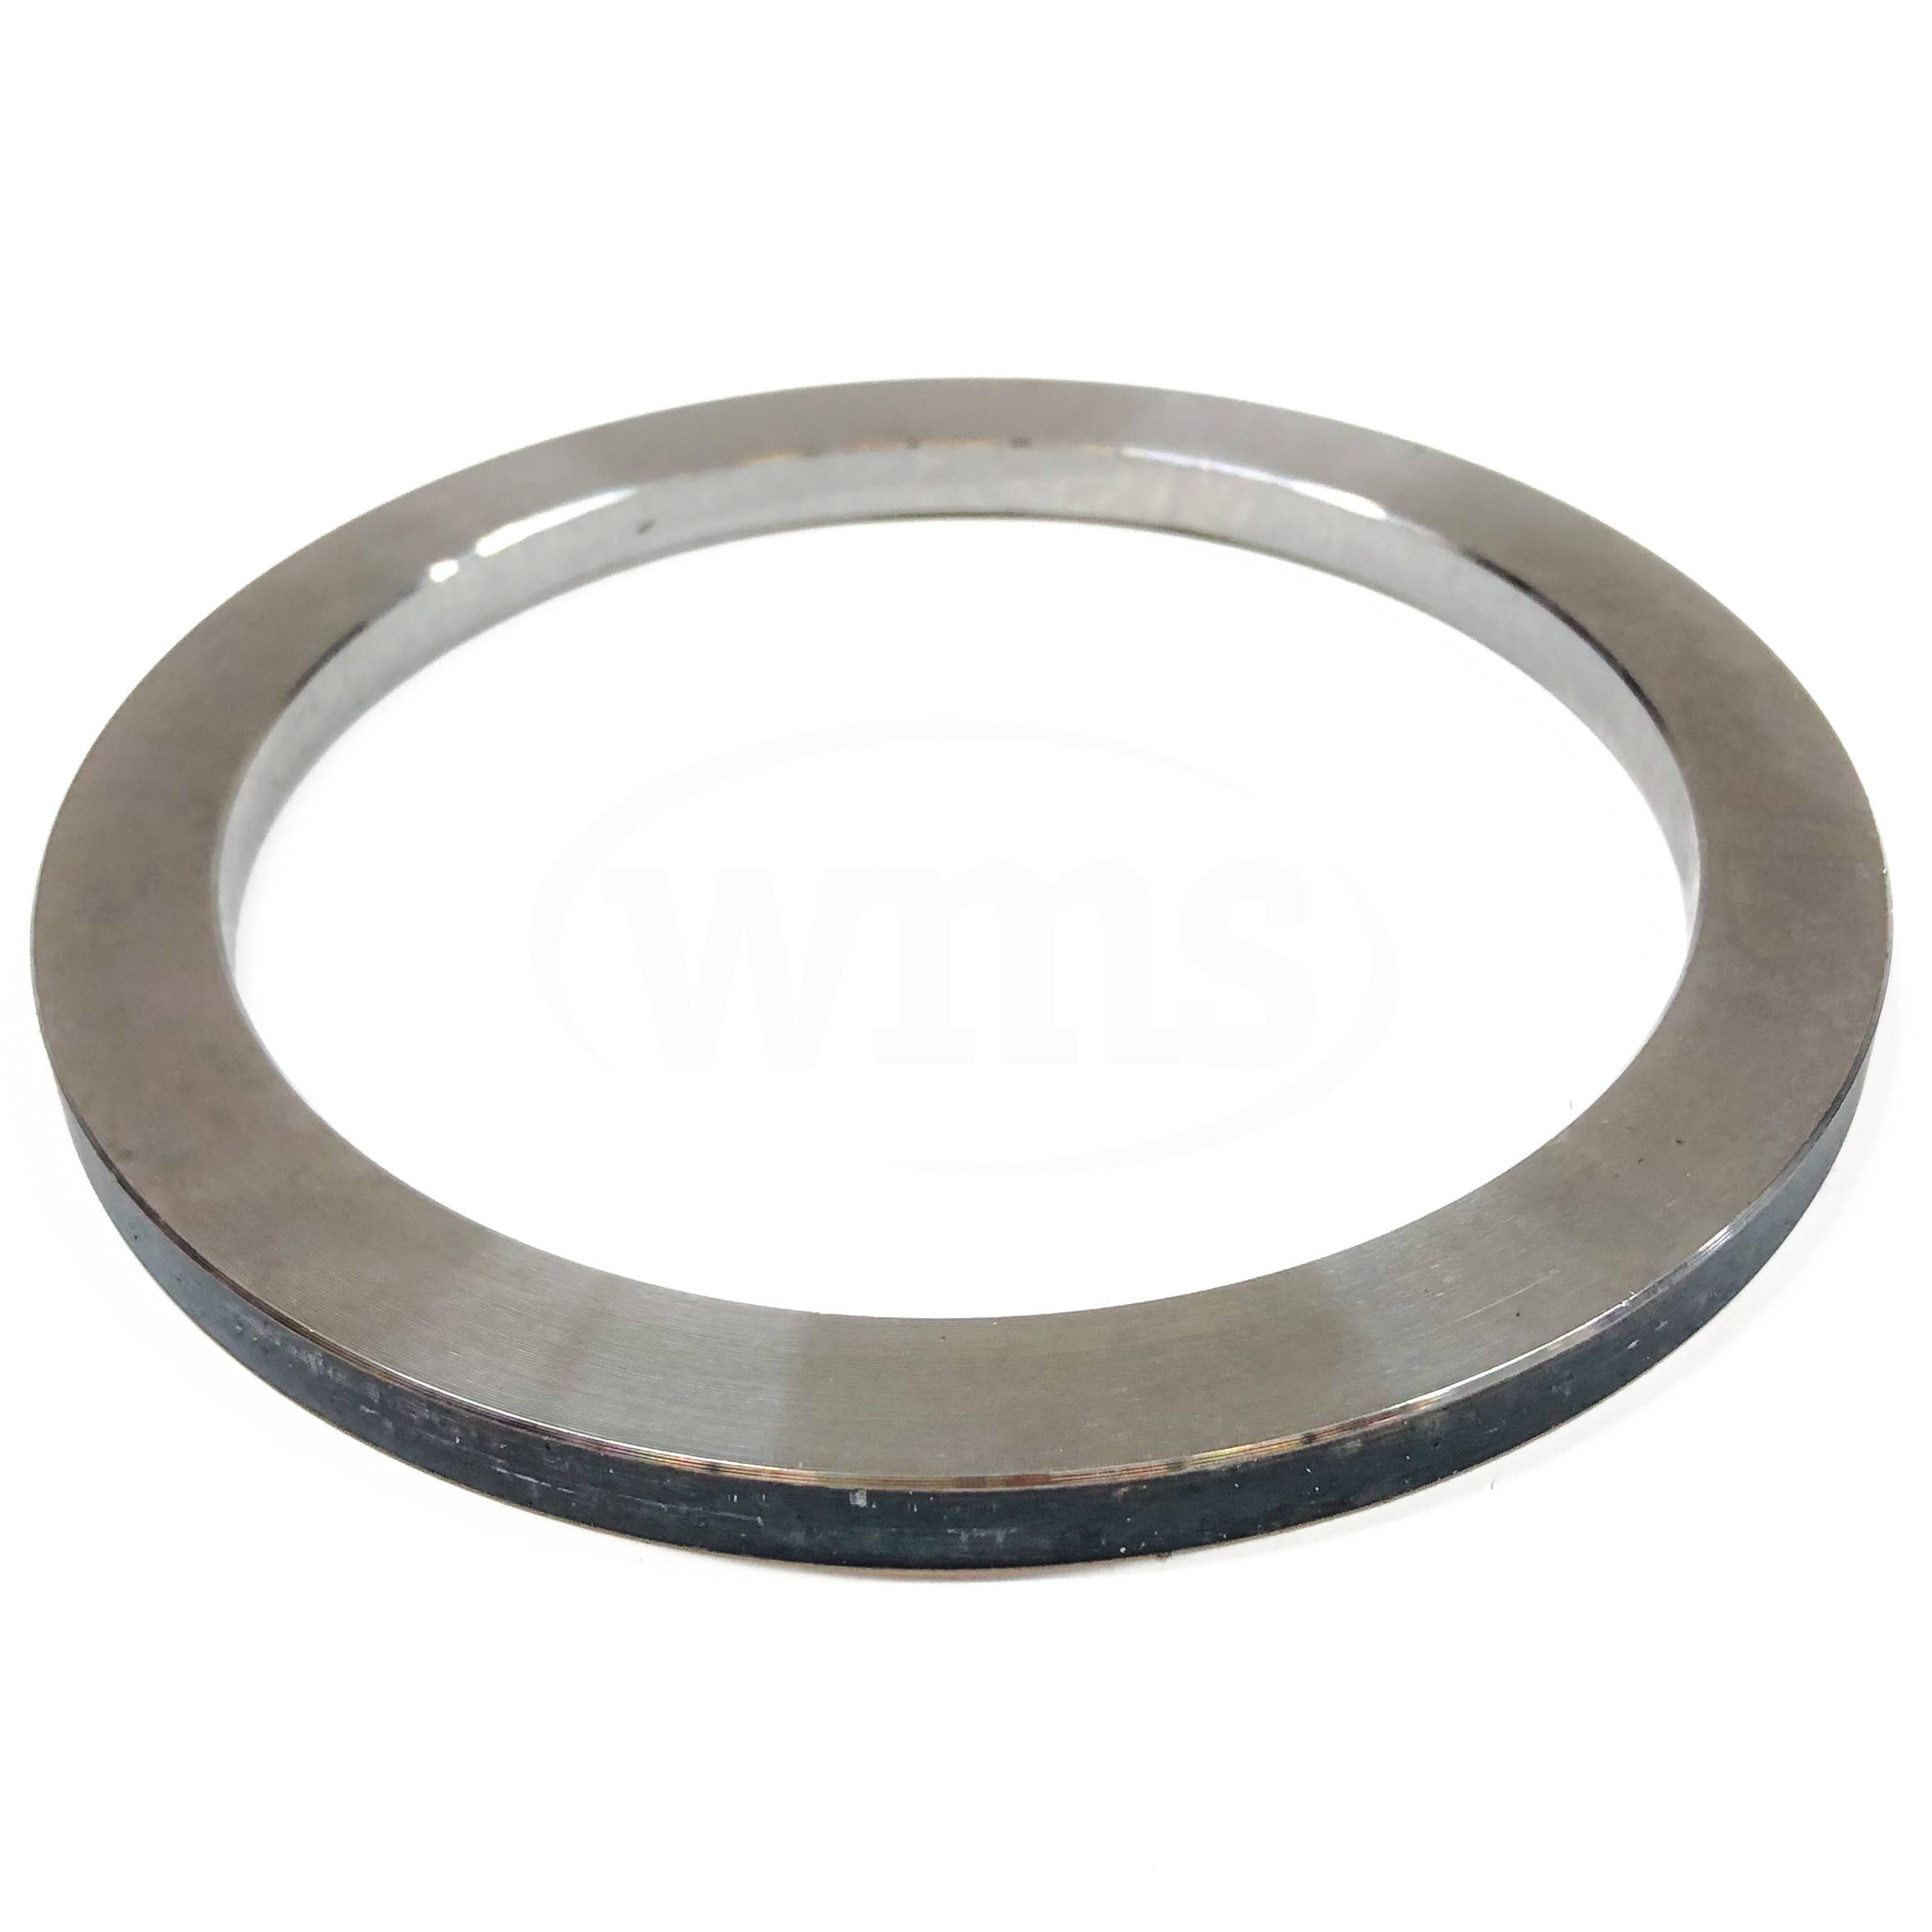 436752A1 Remanufactured CNH Industrial Bearing Thrust Ring 1